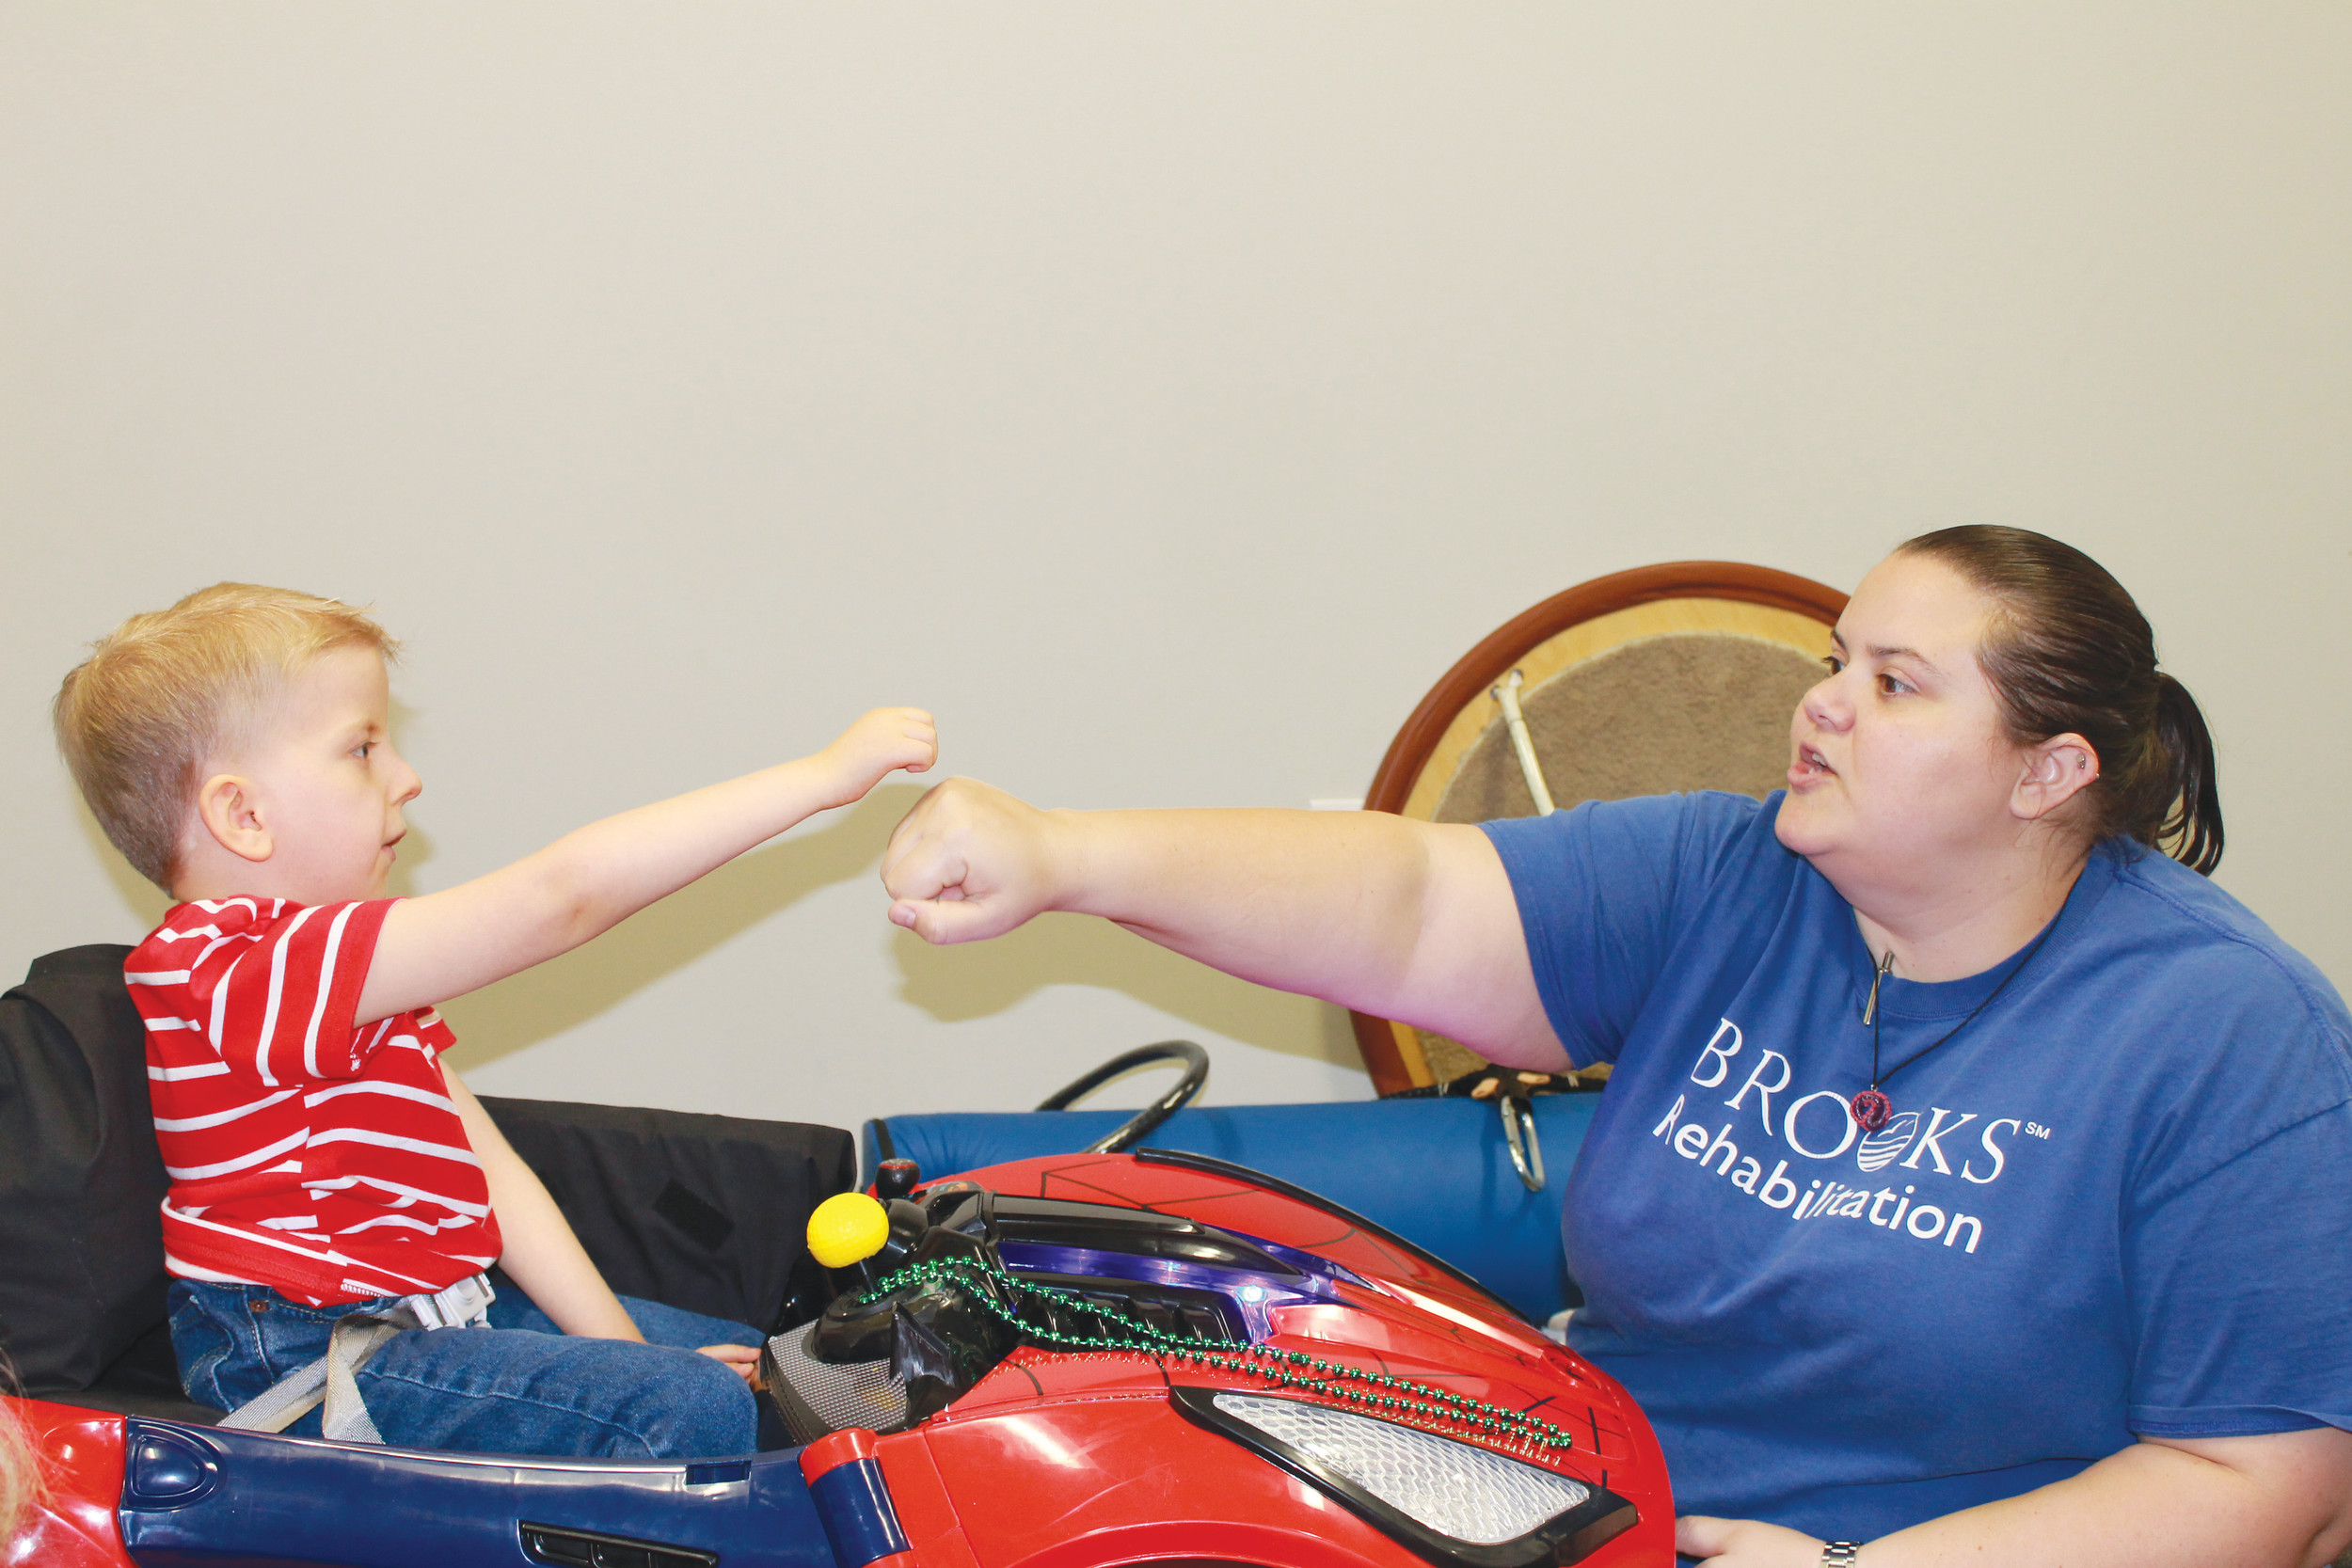 James Bujold, center, prepares to operate a modified Power Wheels car during a recent therapy session with help from his father, Jim Bujold, left, and physical therapist, Kelly Kelaney.